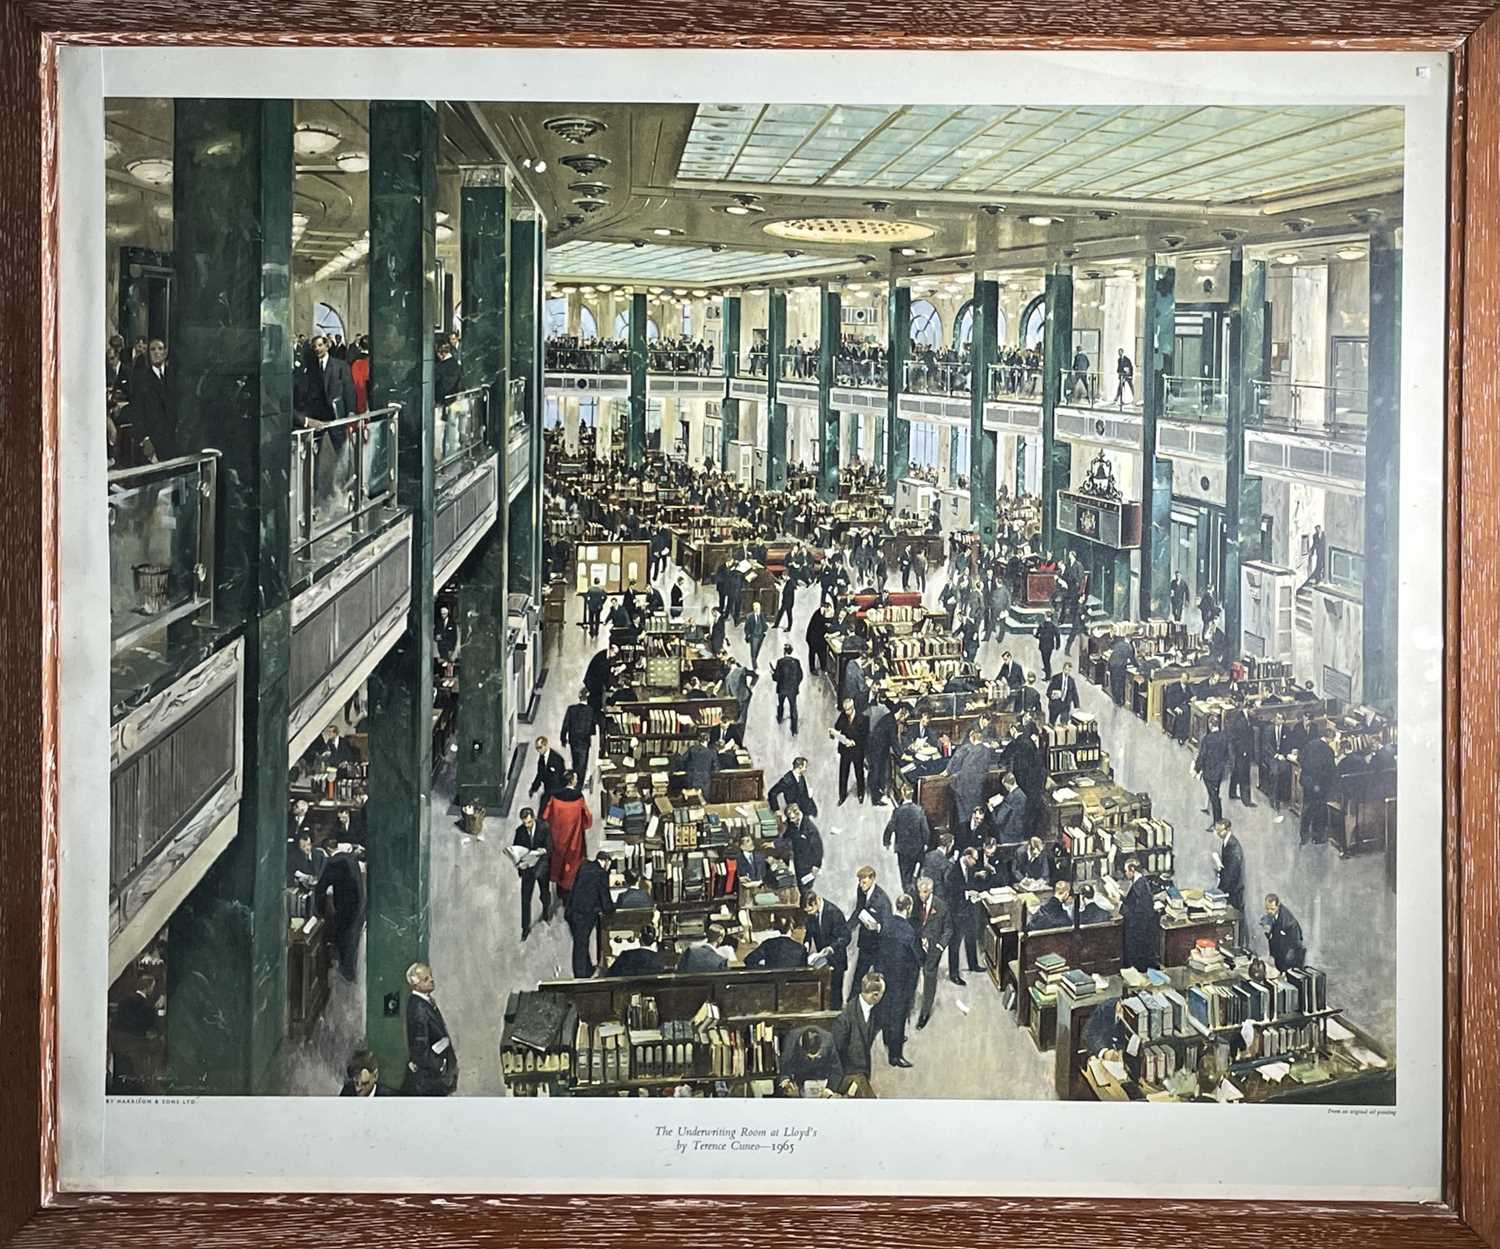 After Terence CUNEO'The Underwriting Room at Lloyd's'Colour print 52.5 x 63.5cm (sight size) - Image 3 of 3